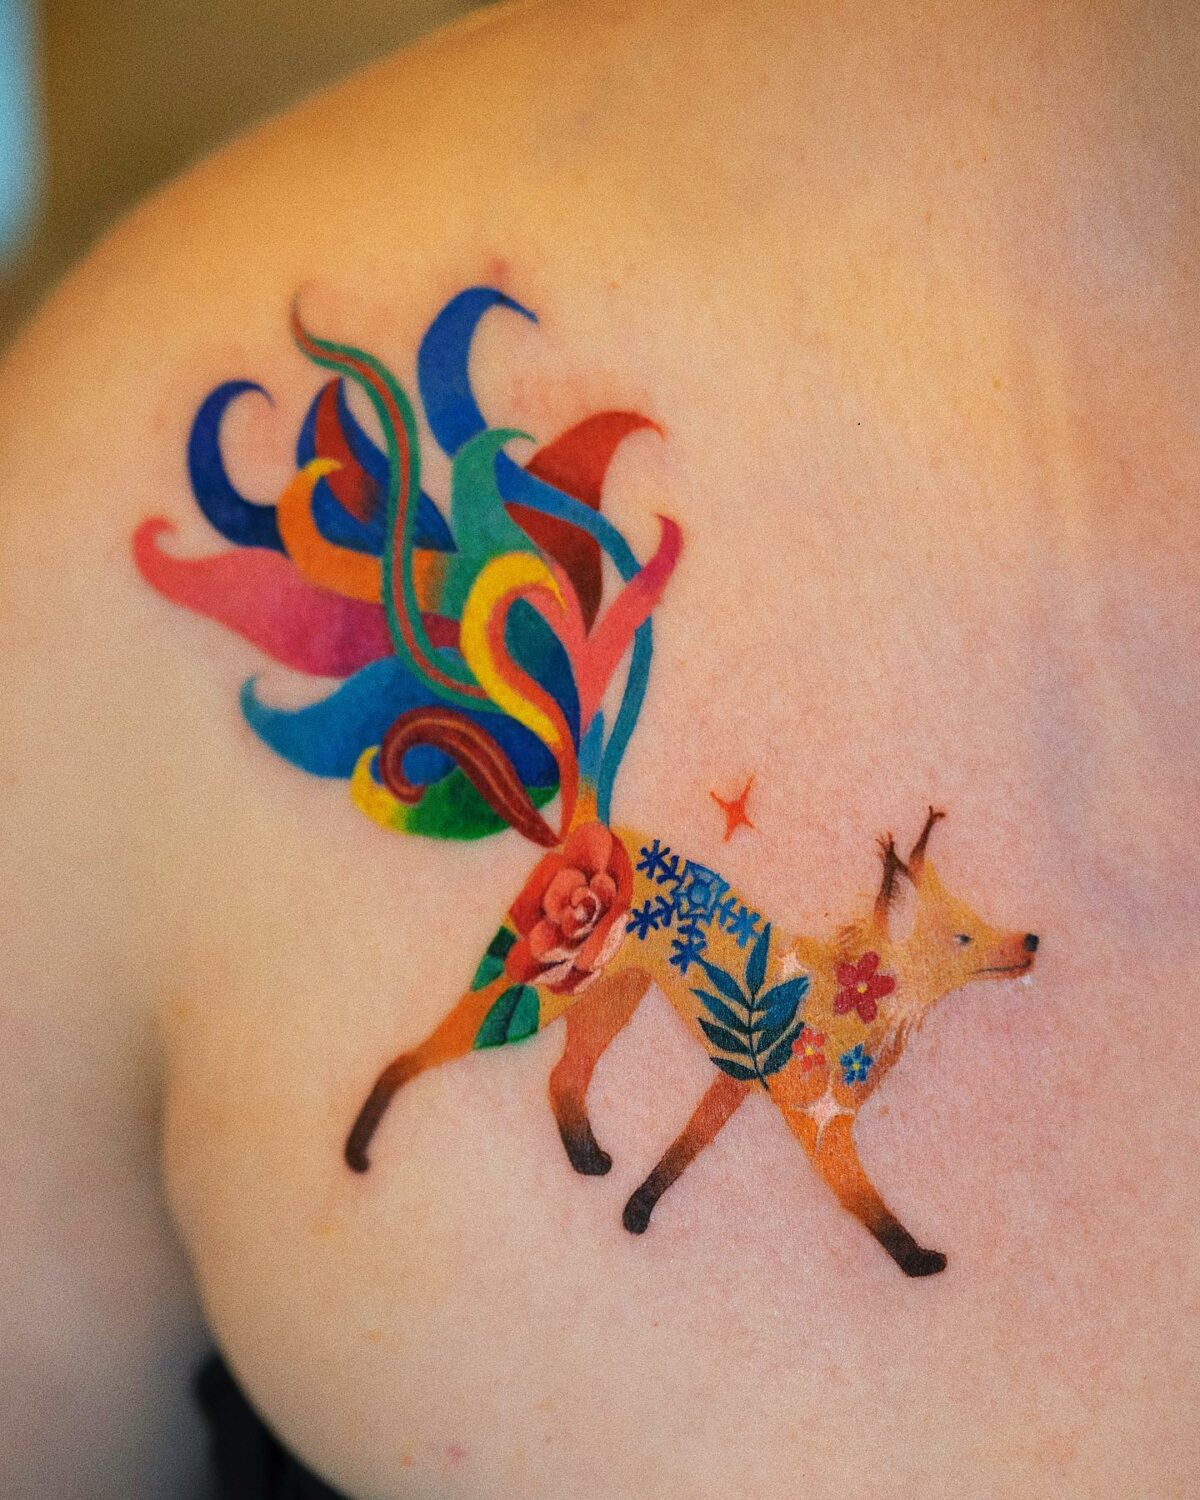 Vibrant and multicolored fauna and flora tattoos by Zihee